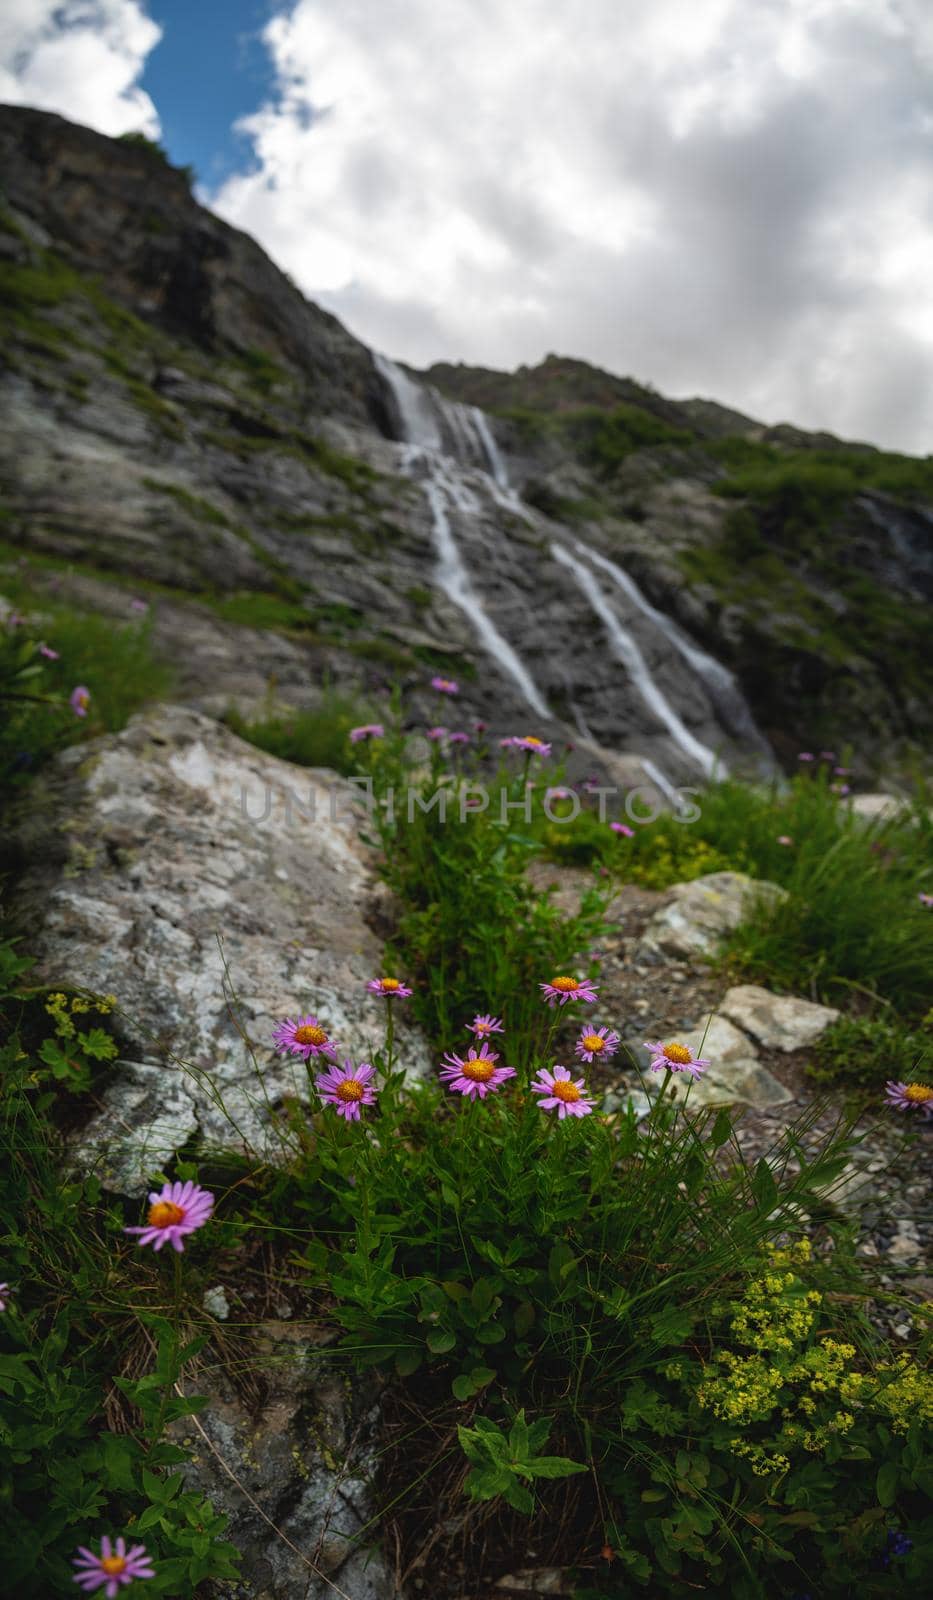 pink mountain flowers close-up, against the background of a blurry waterfall falling from a sheer cliff.